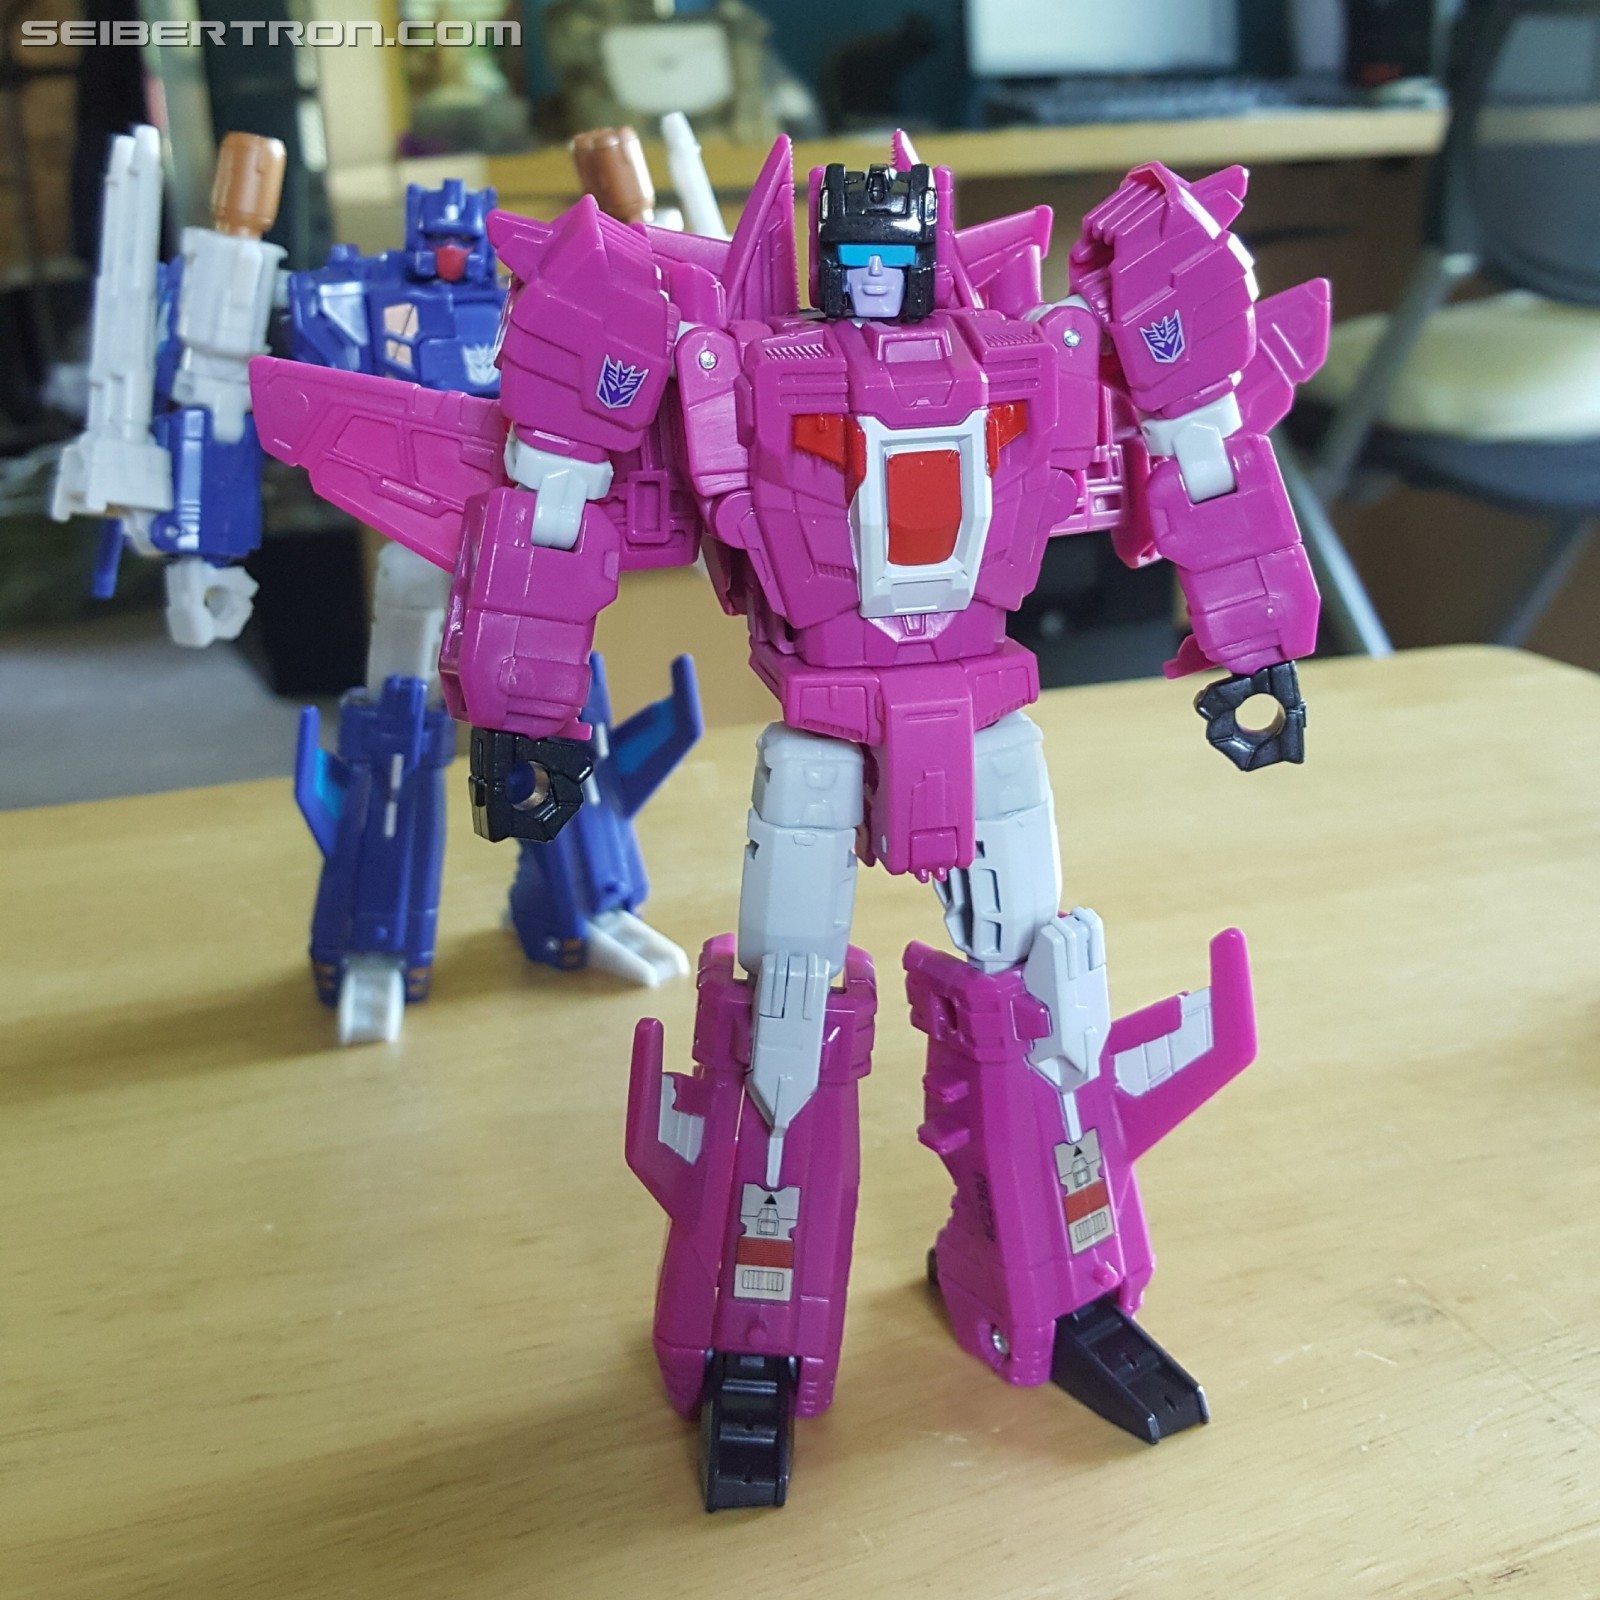 Transformers News: Domestic Listings for Takara Transformers LG-EX Big Powered and Comparison to G1 Figures